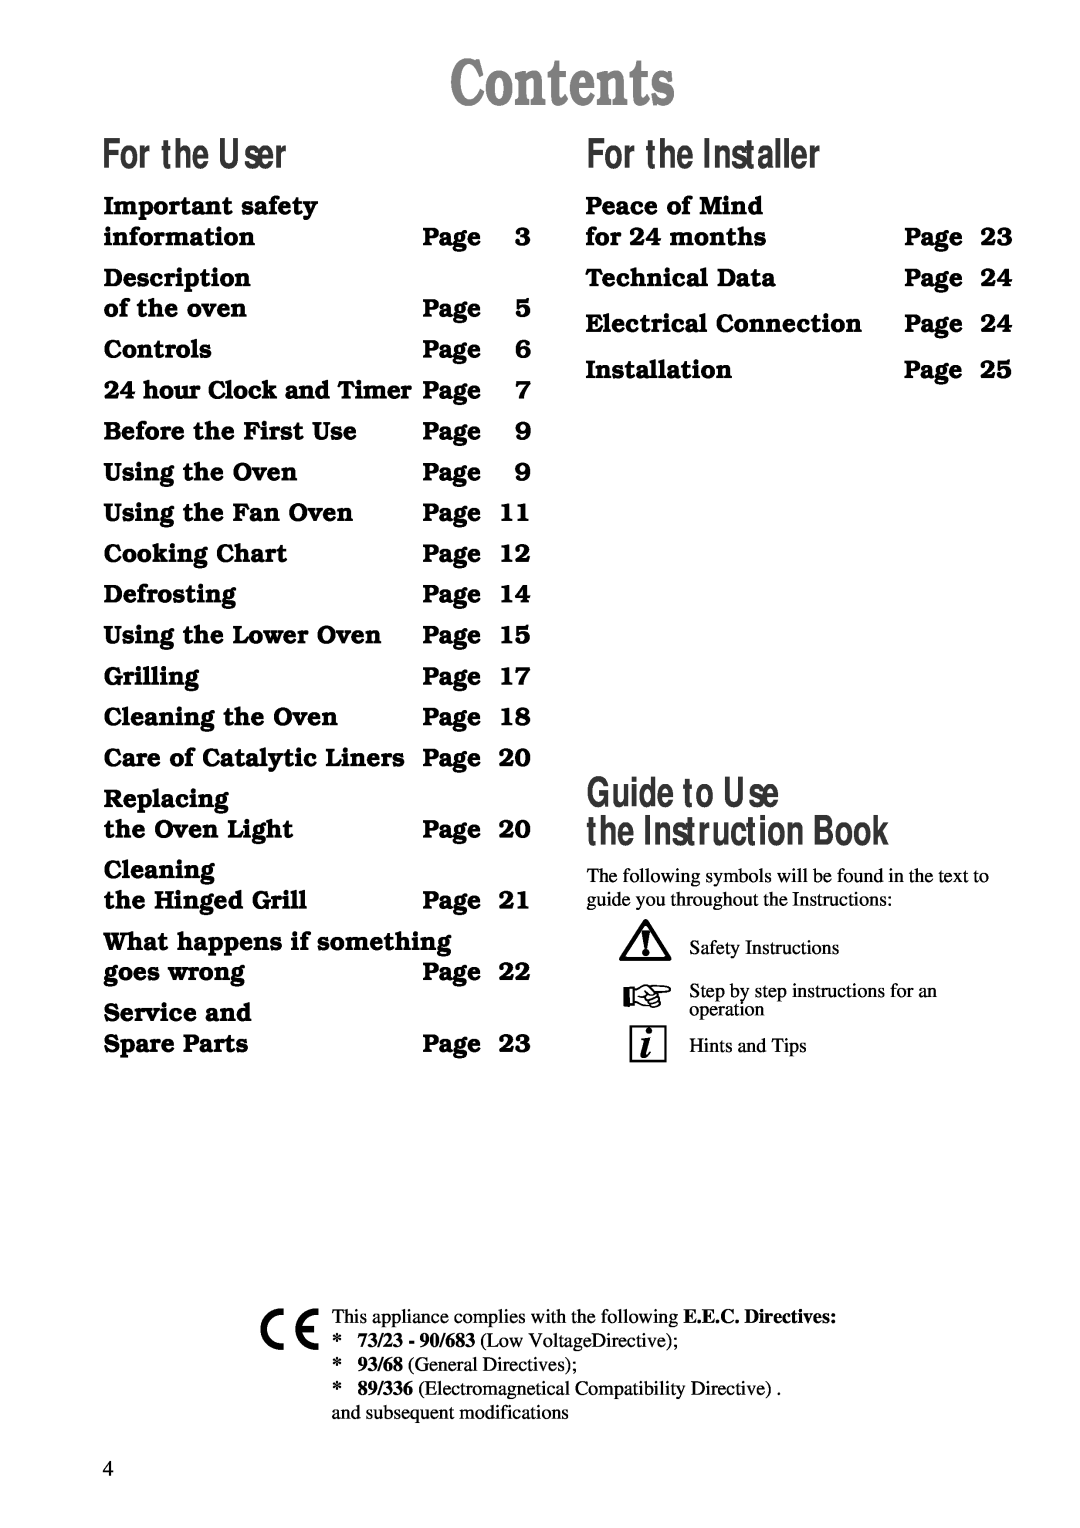 Zanussi ZDF 866 manual Contents, For the User, For the Installer, Guide to Use the Instruction Book 